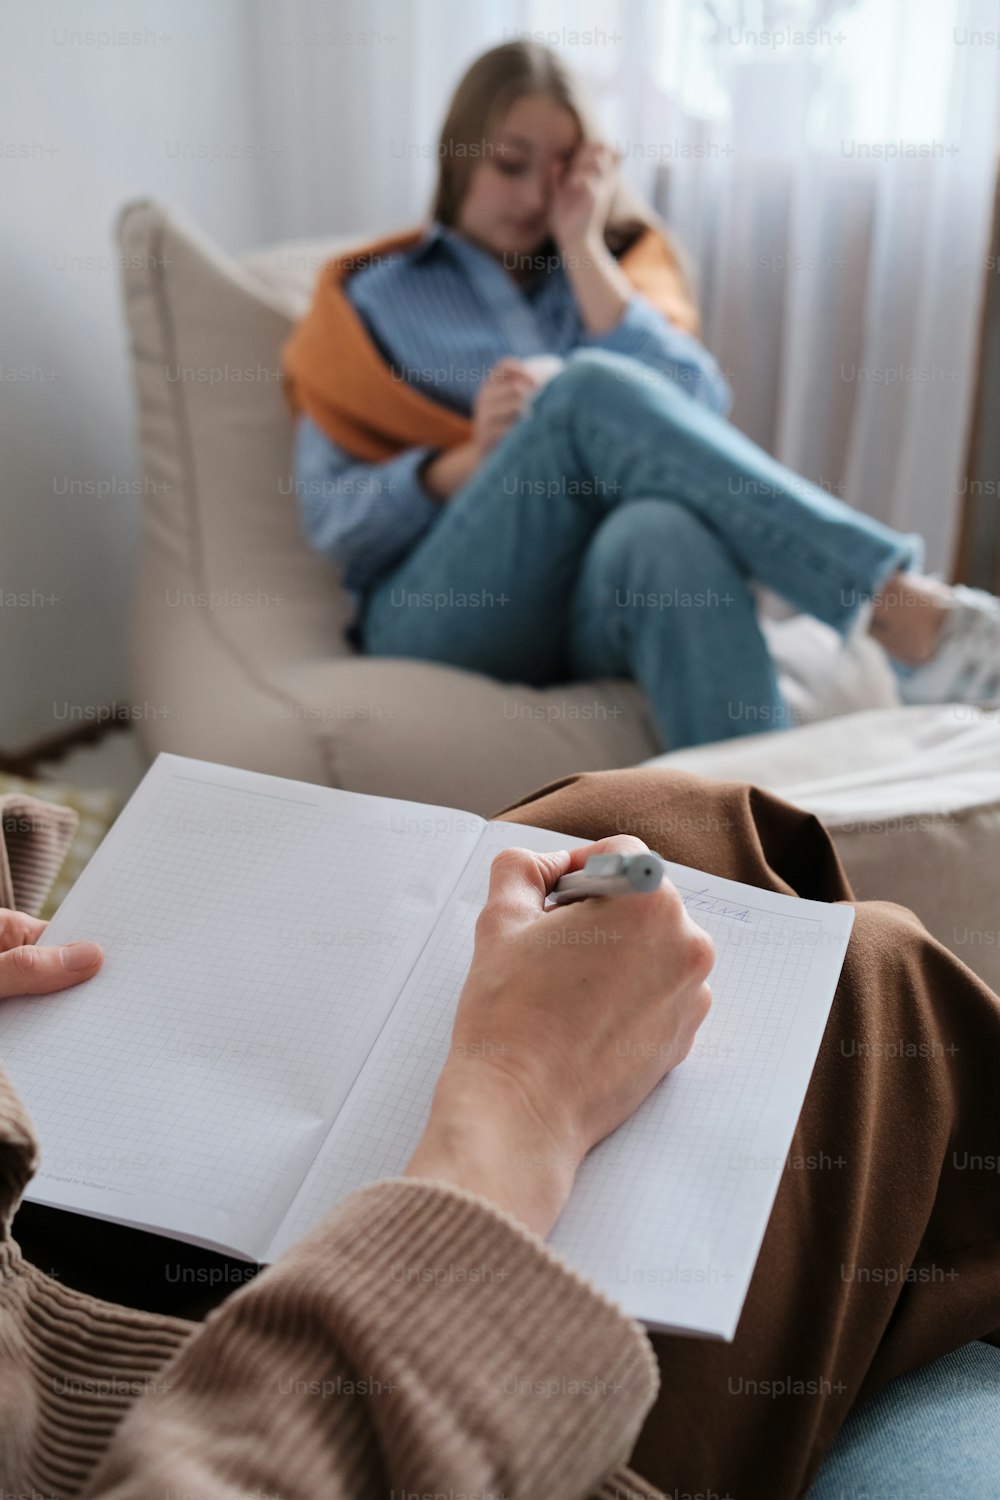 a woman sitting on a couch writing on a piece of paper